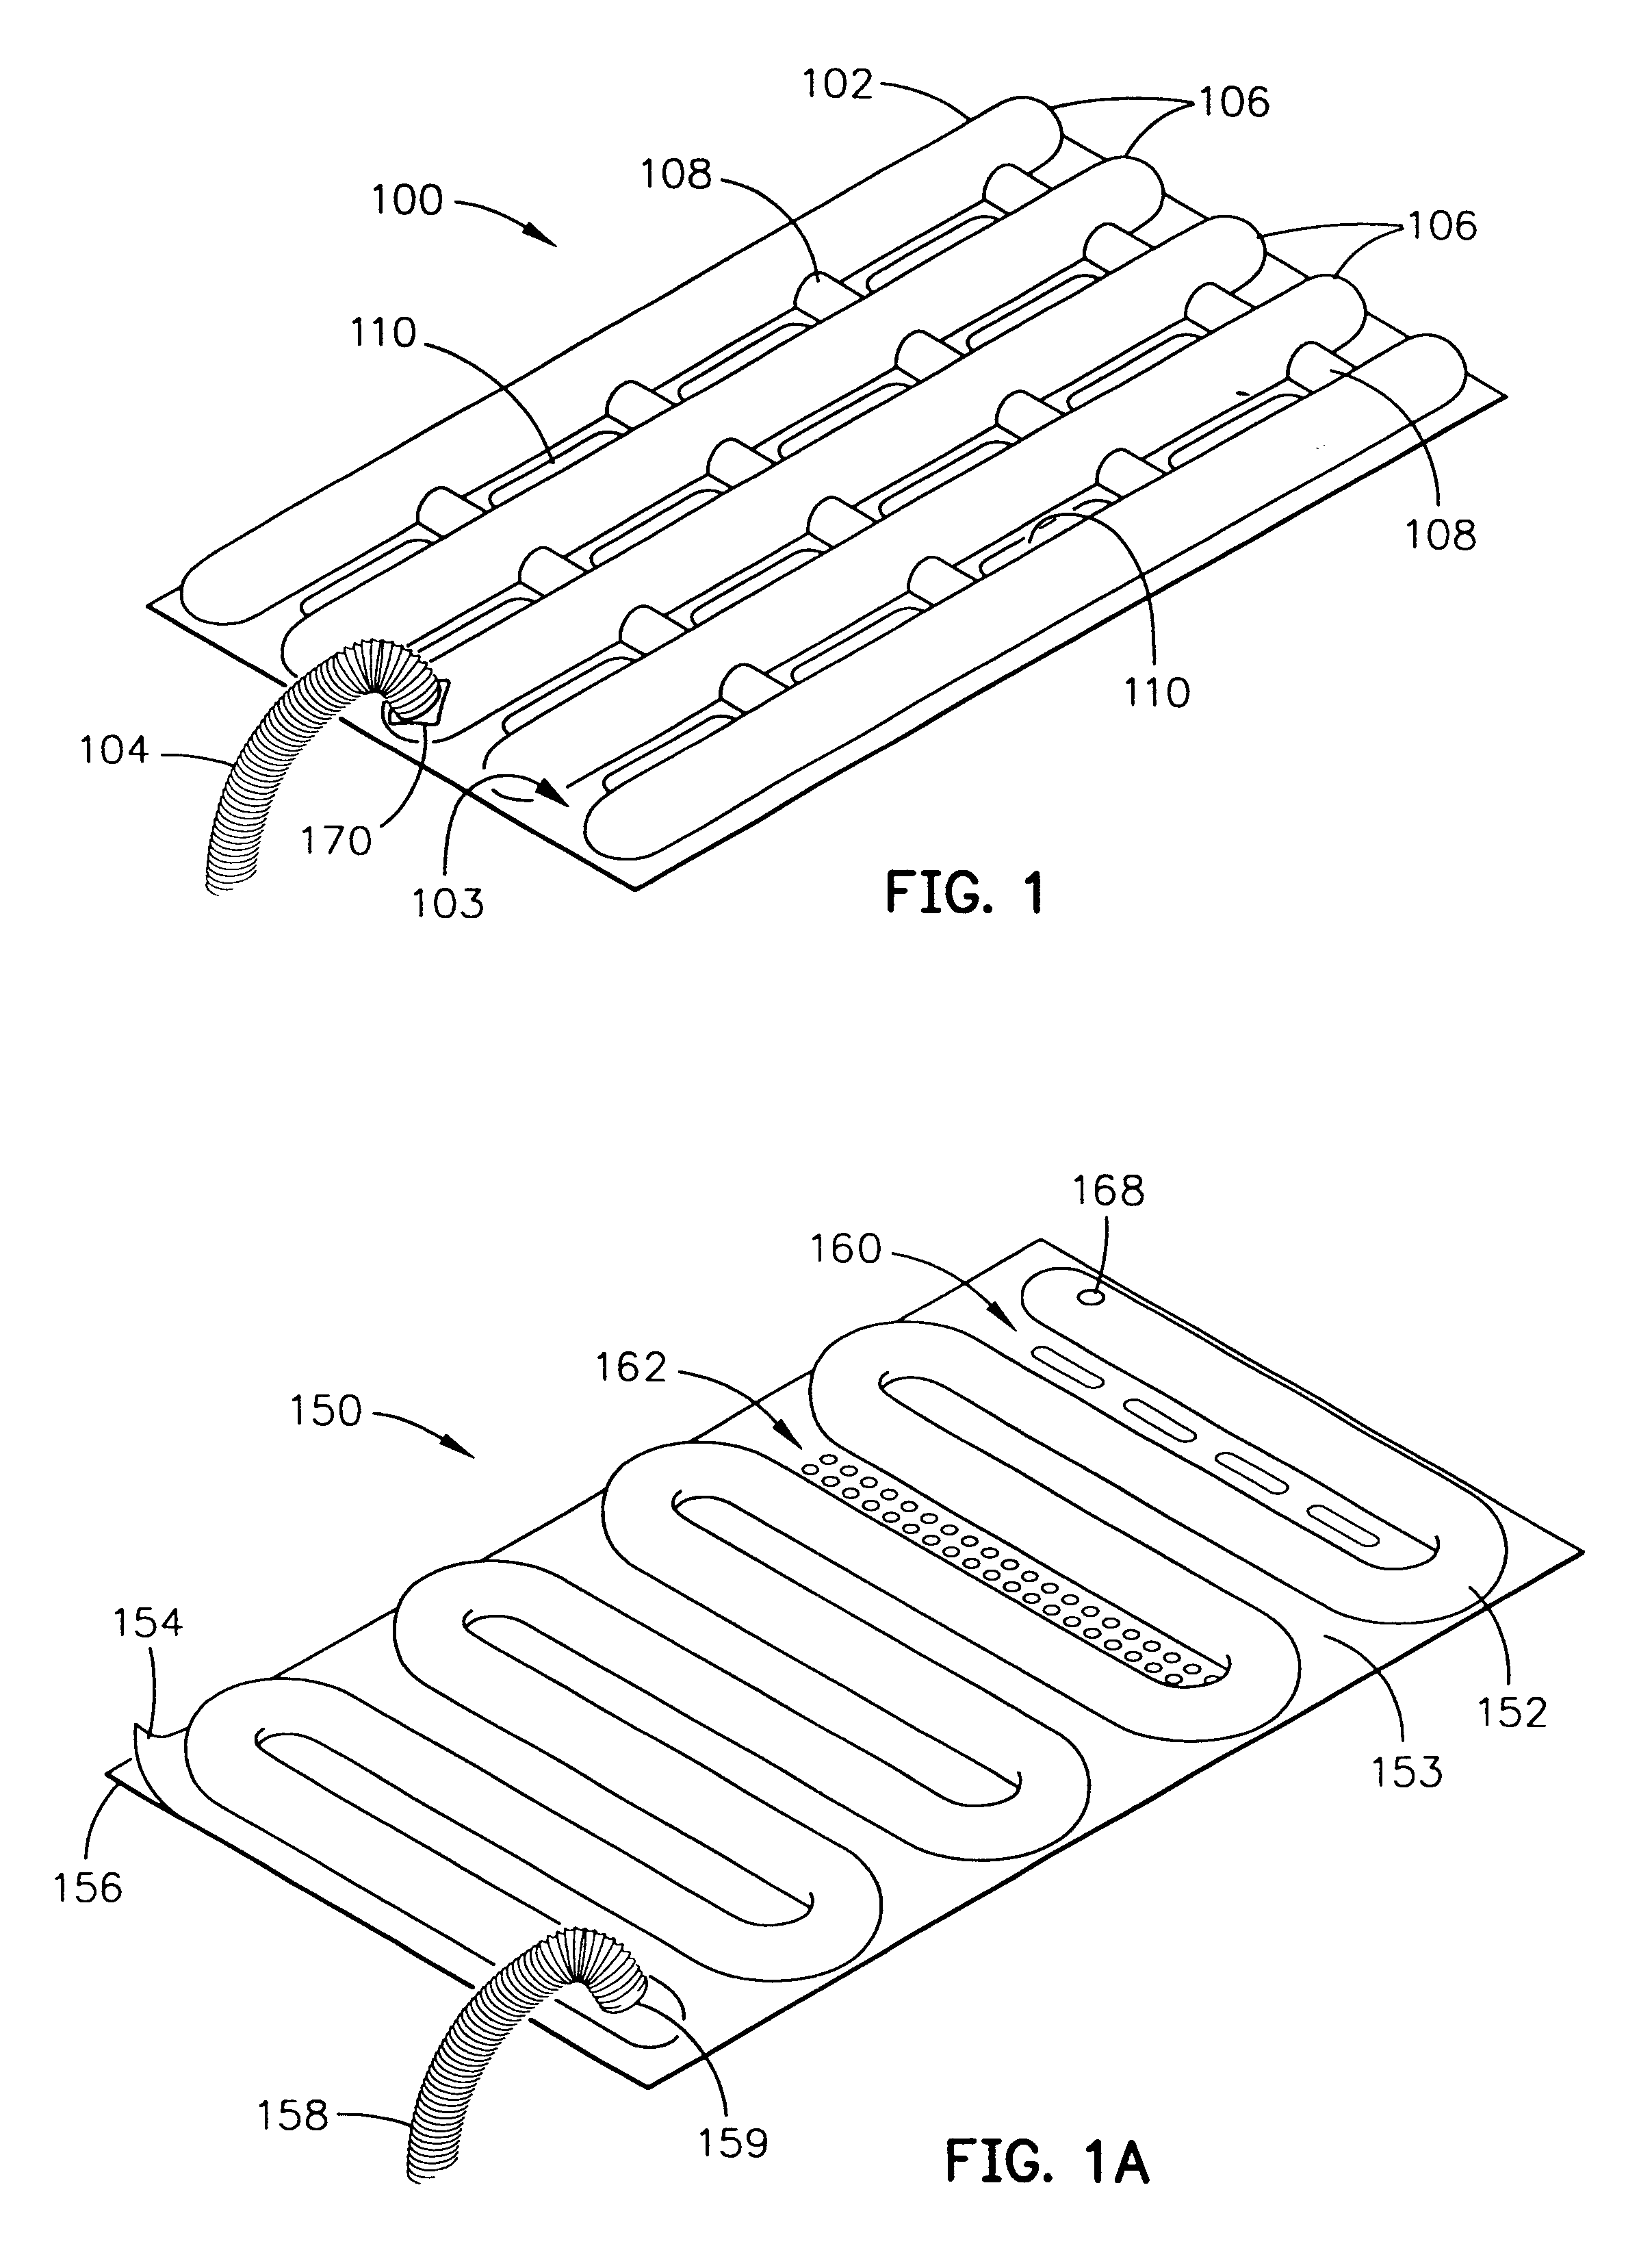 Cooling devices with high-efficiency cooling features